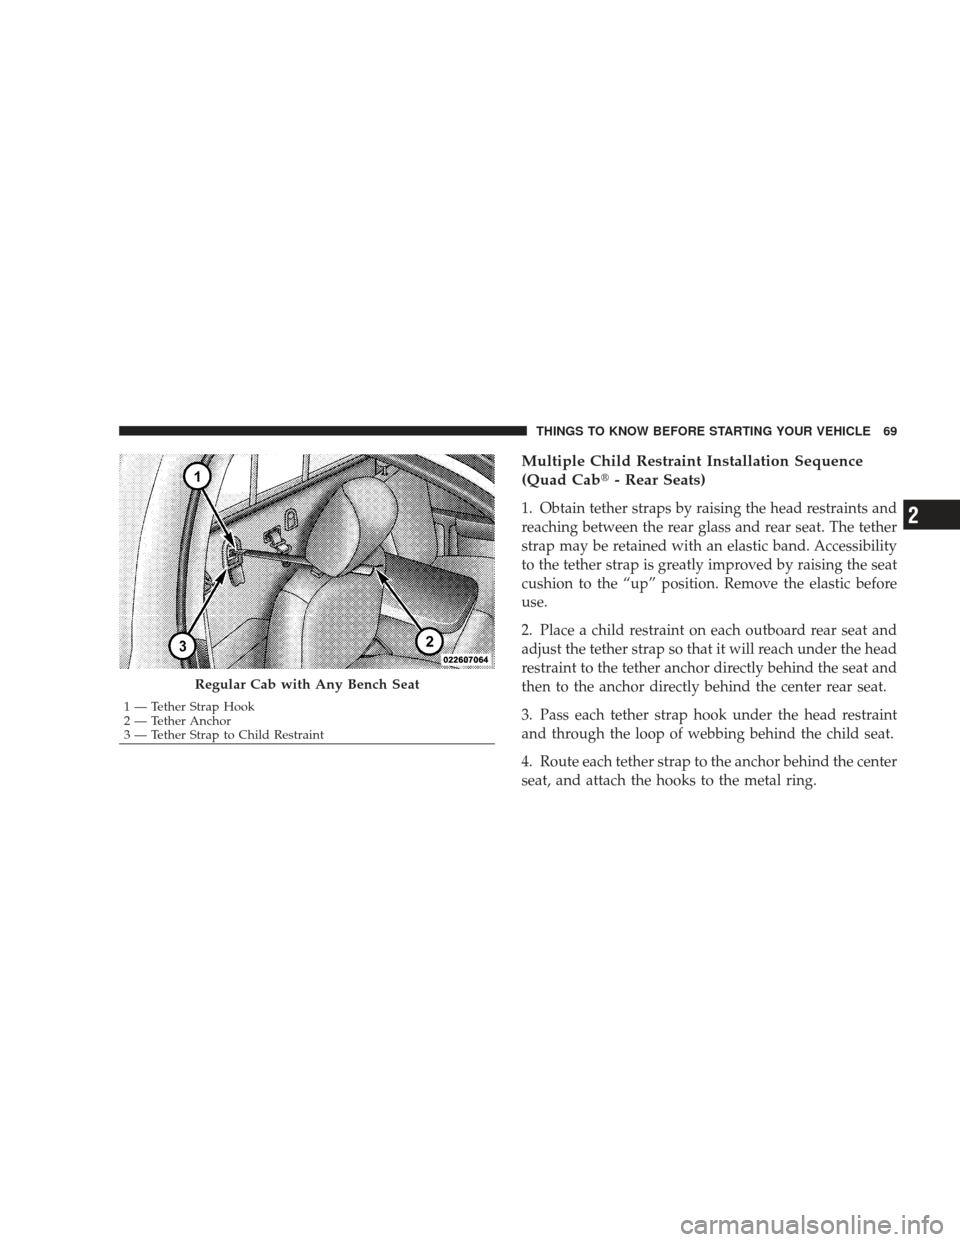 DODGE RAM 4500 CHASSIS CAB 2009 4.G Manual PDF Multiple Child Restraint Installation Sequence
(Quad Cab- Rear Seats)
1. Obtain tether straps by raising the head restraints and
reaching between the rear glass and rear seat. The tether
strap may be